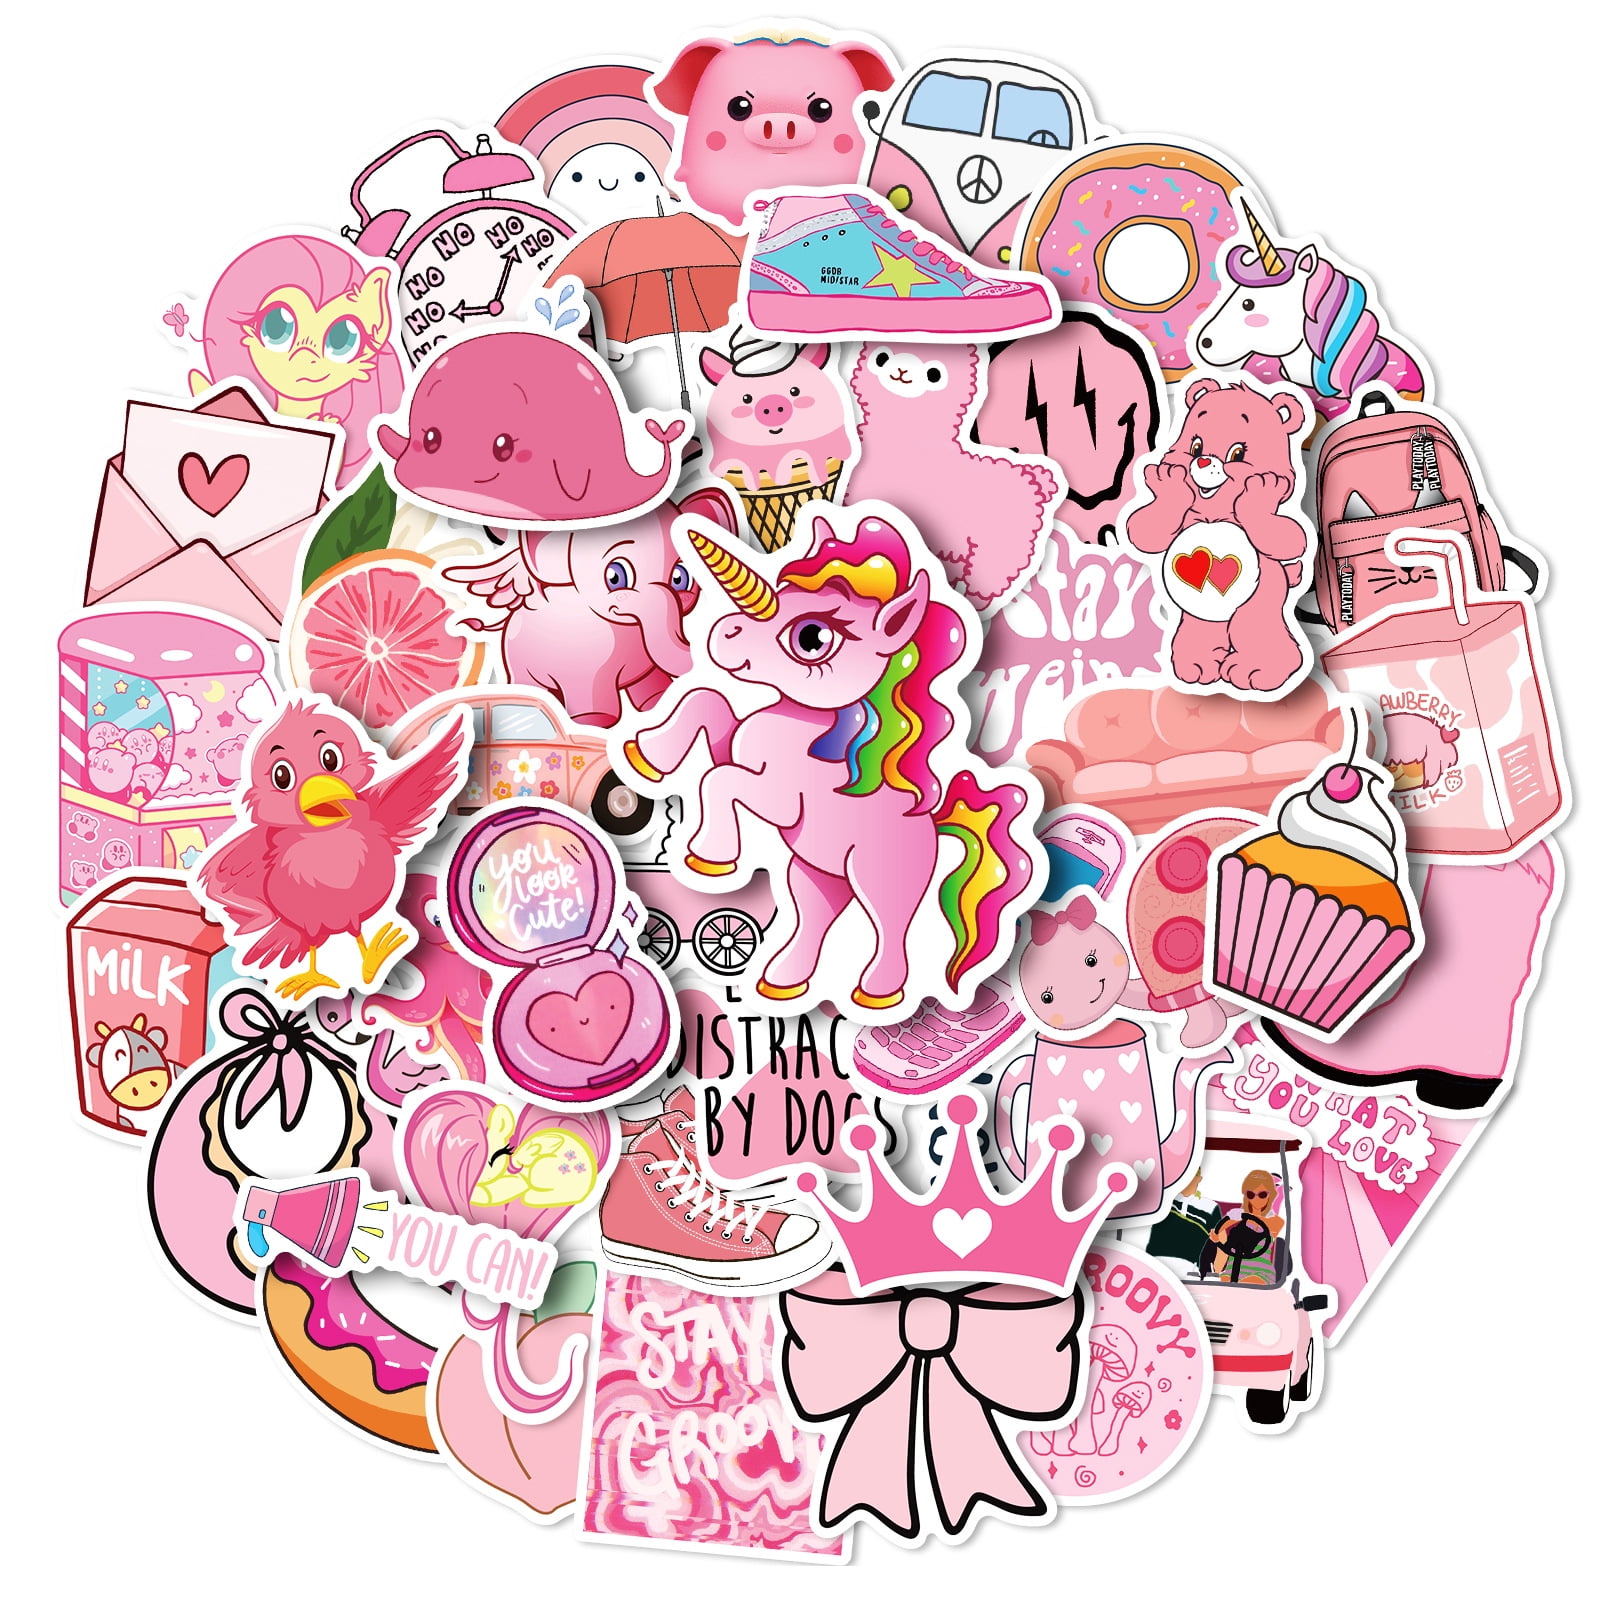 Cute Kawaii Stickers, Cute Sticker Sheets, Yellow Stickers, Pink Stick –  All The Kewt Stickers